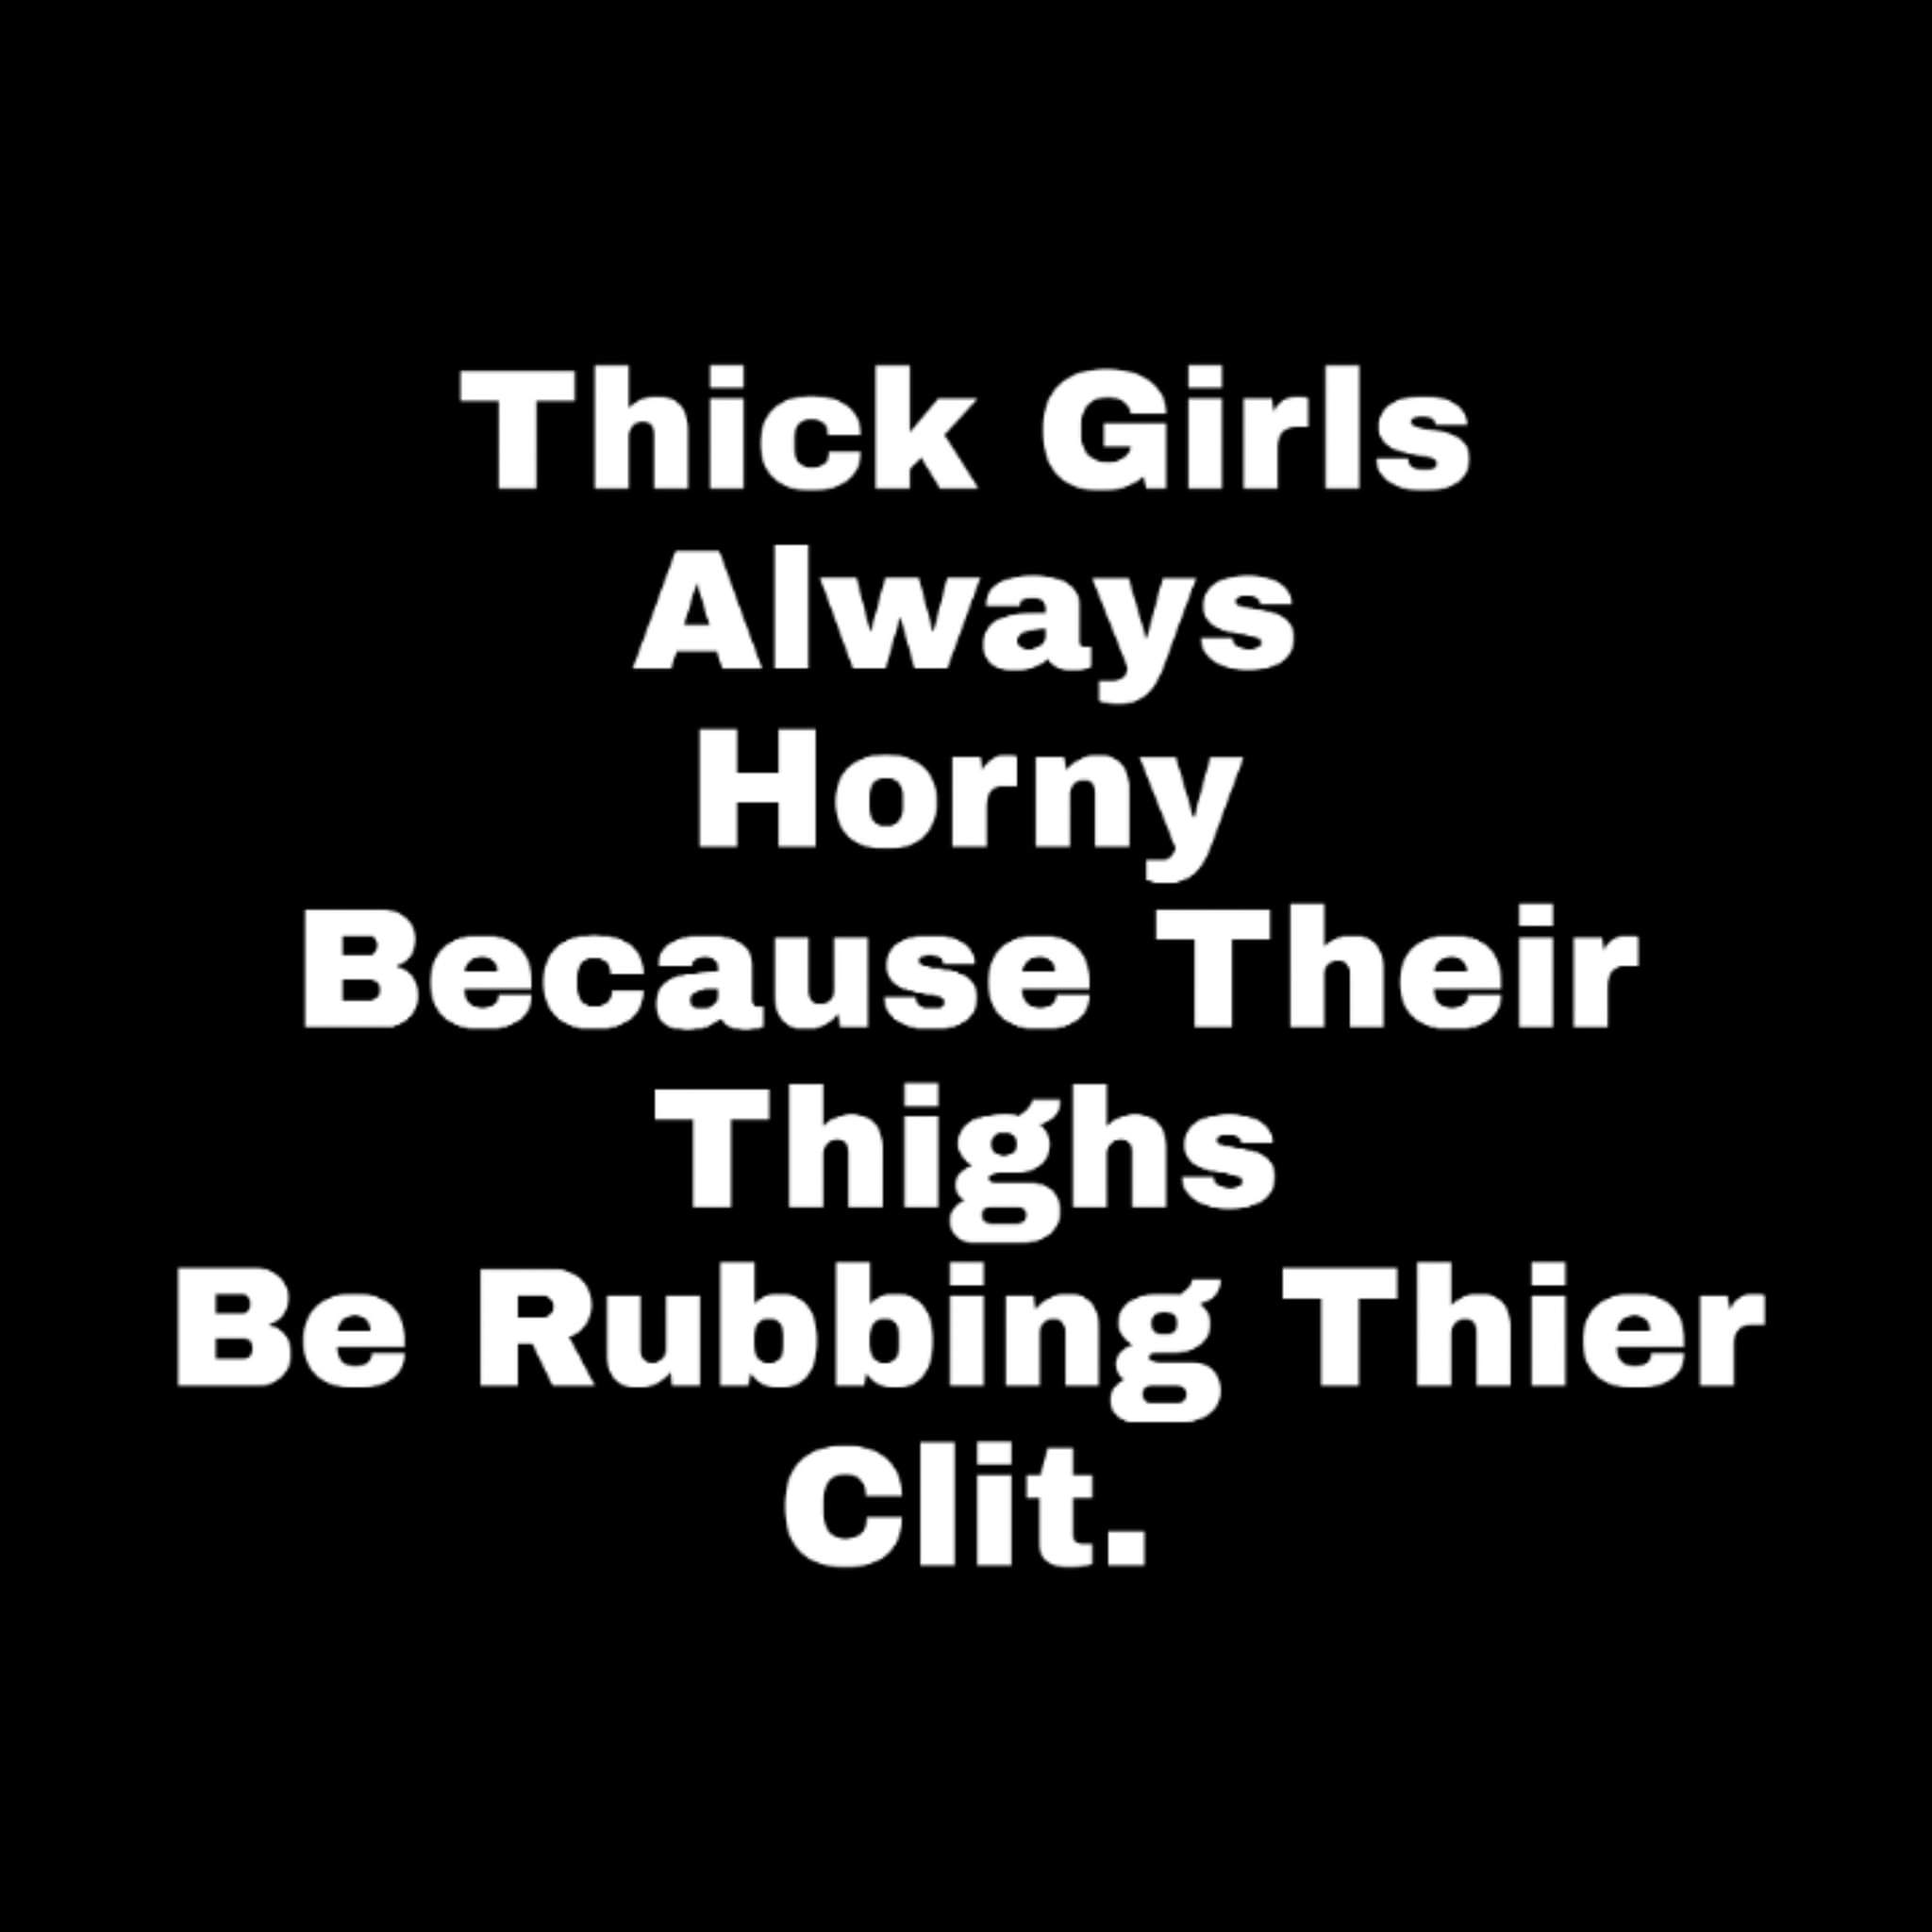 dont piss me off - Thick Girls Always Horny Because Their Thighs Be Rubbing Thier Clit.